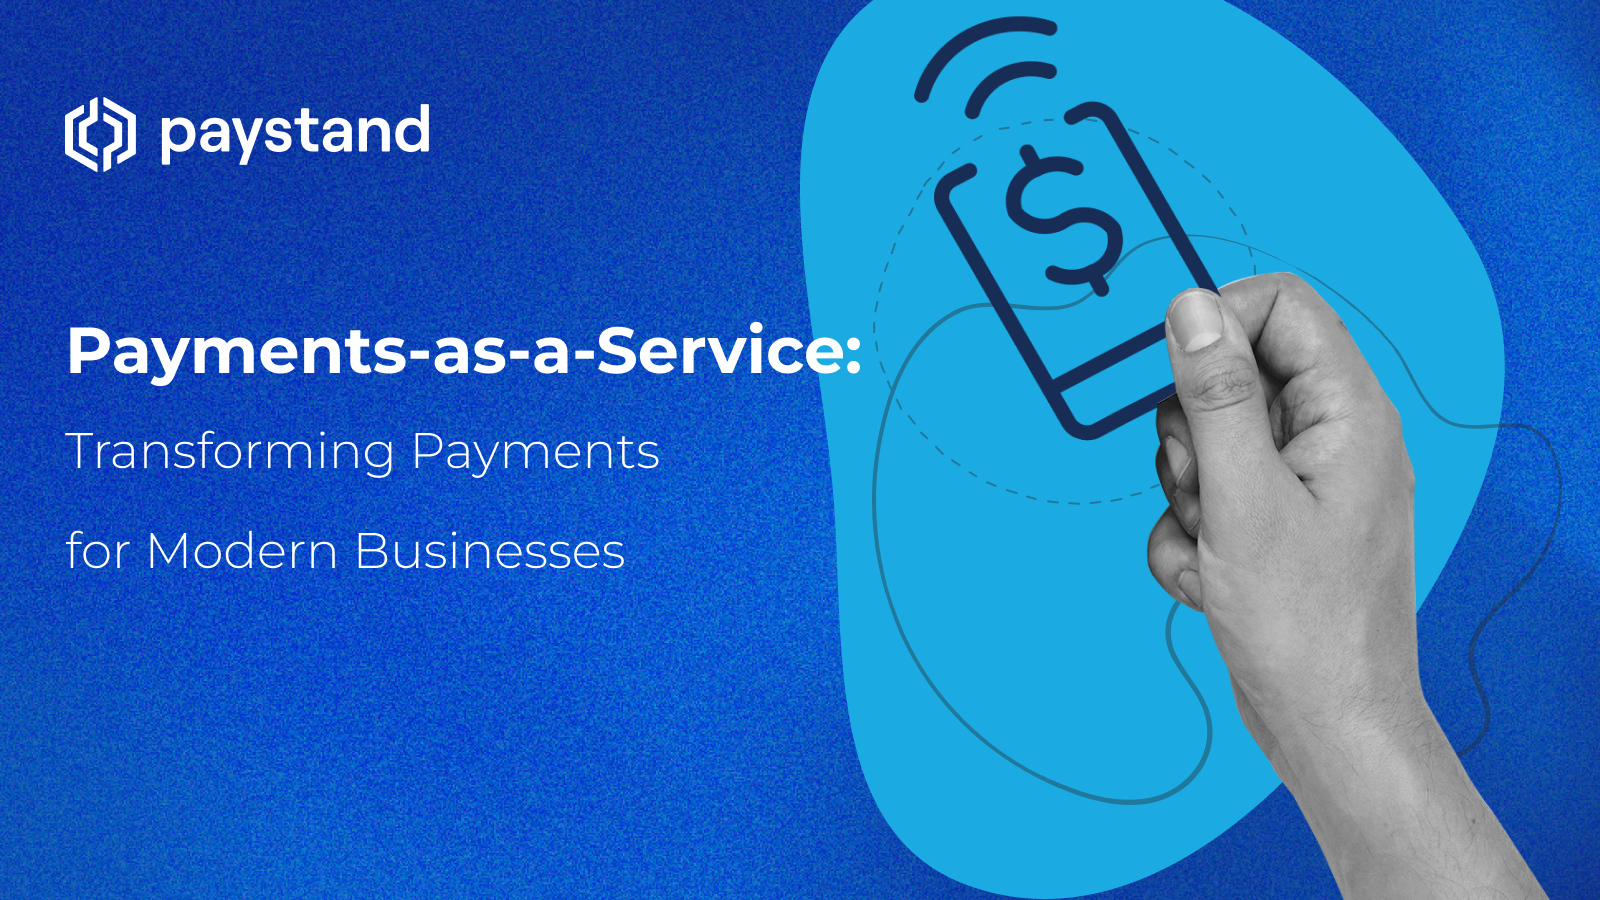 Payments-as-a-Service: Transforming Payments for Modern Businesses